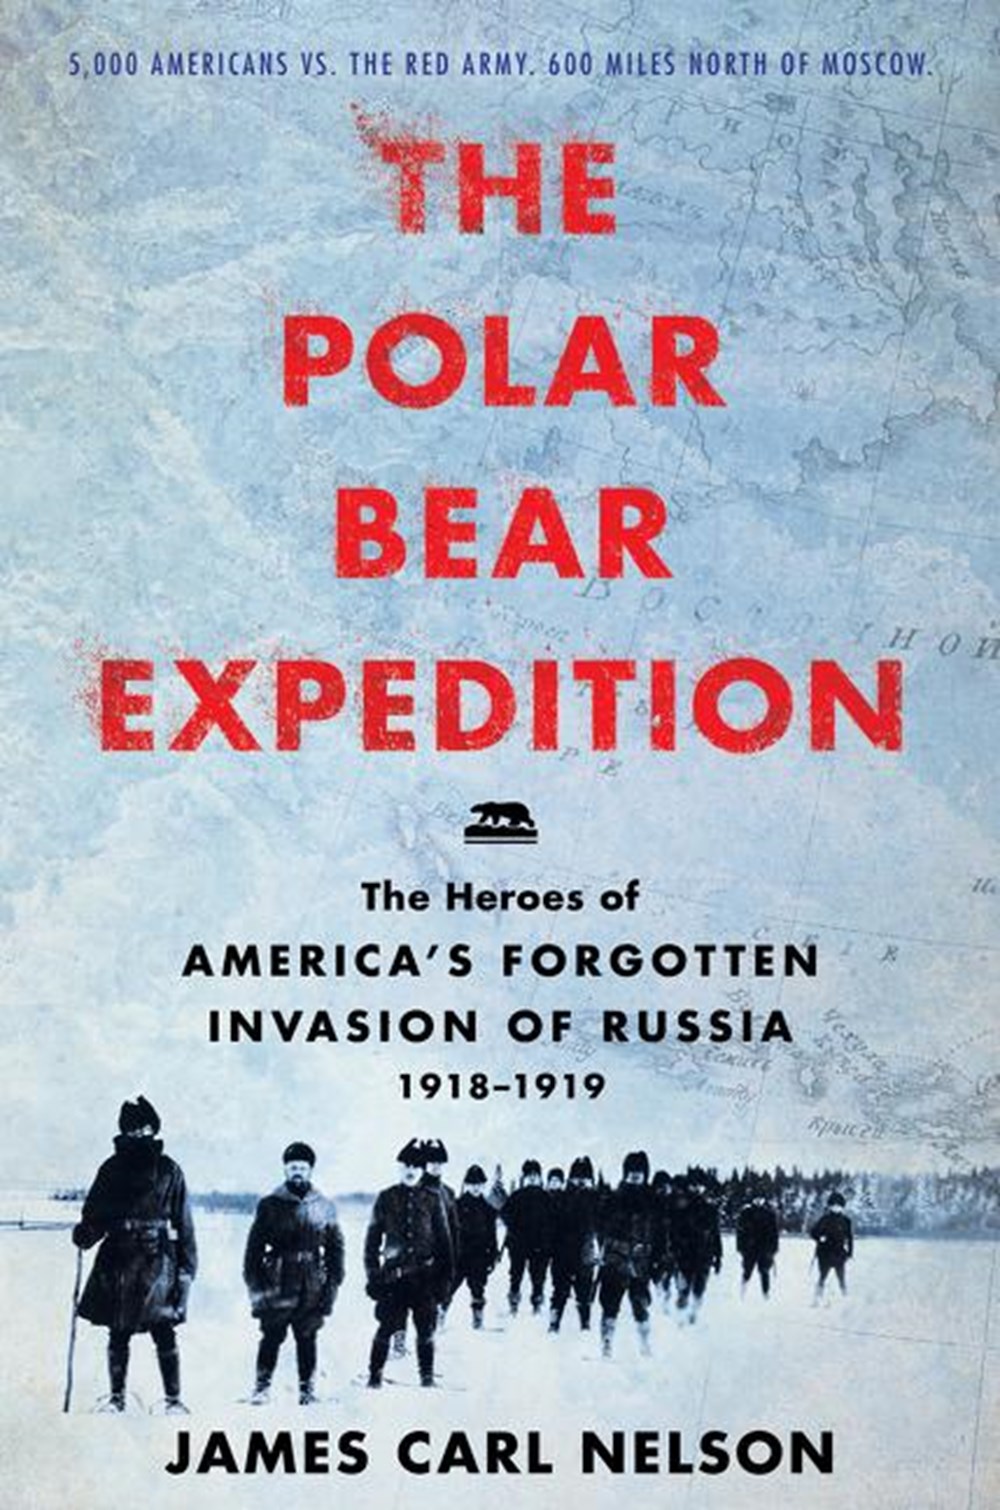 Polar Bear Expedition: The Heroes of America's Forgotten Invasion of Russia, 1918-1919